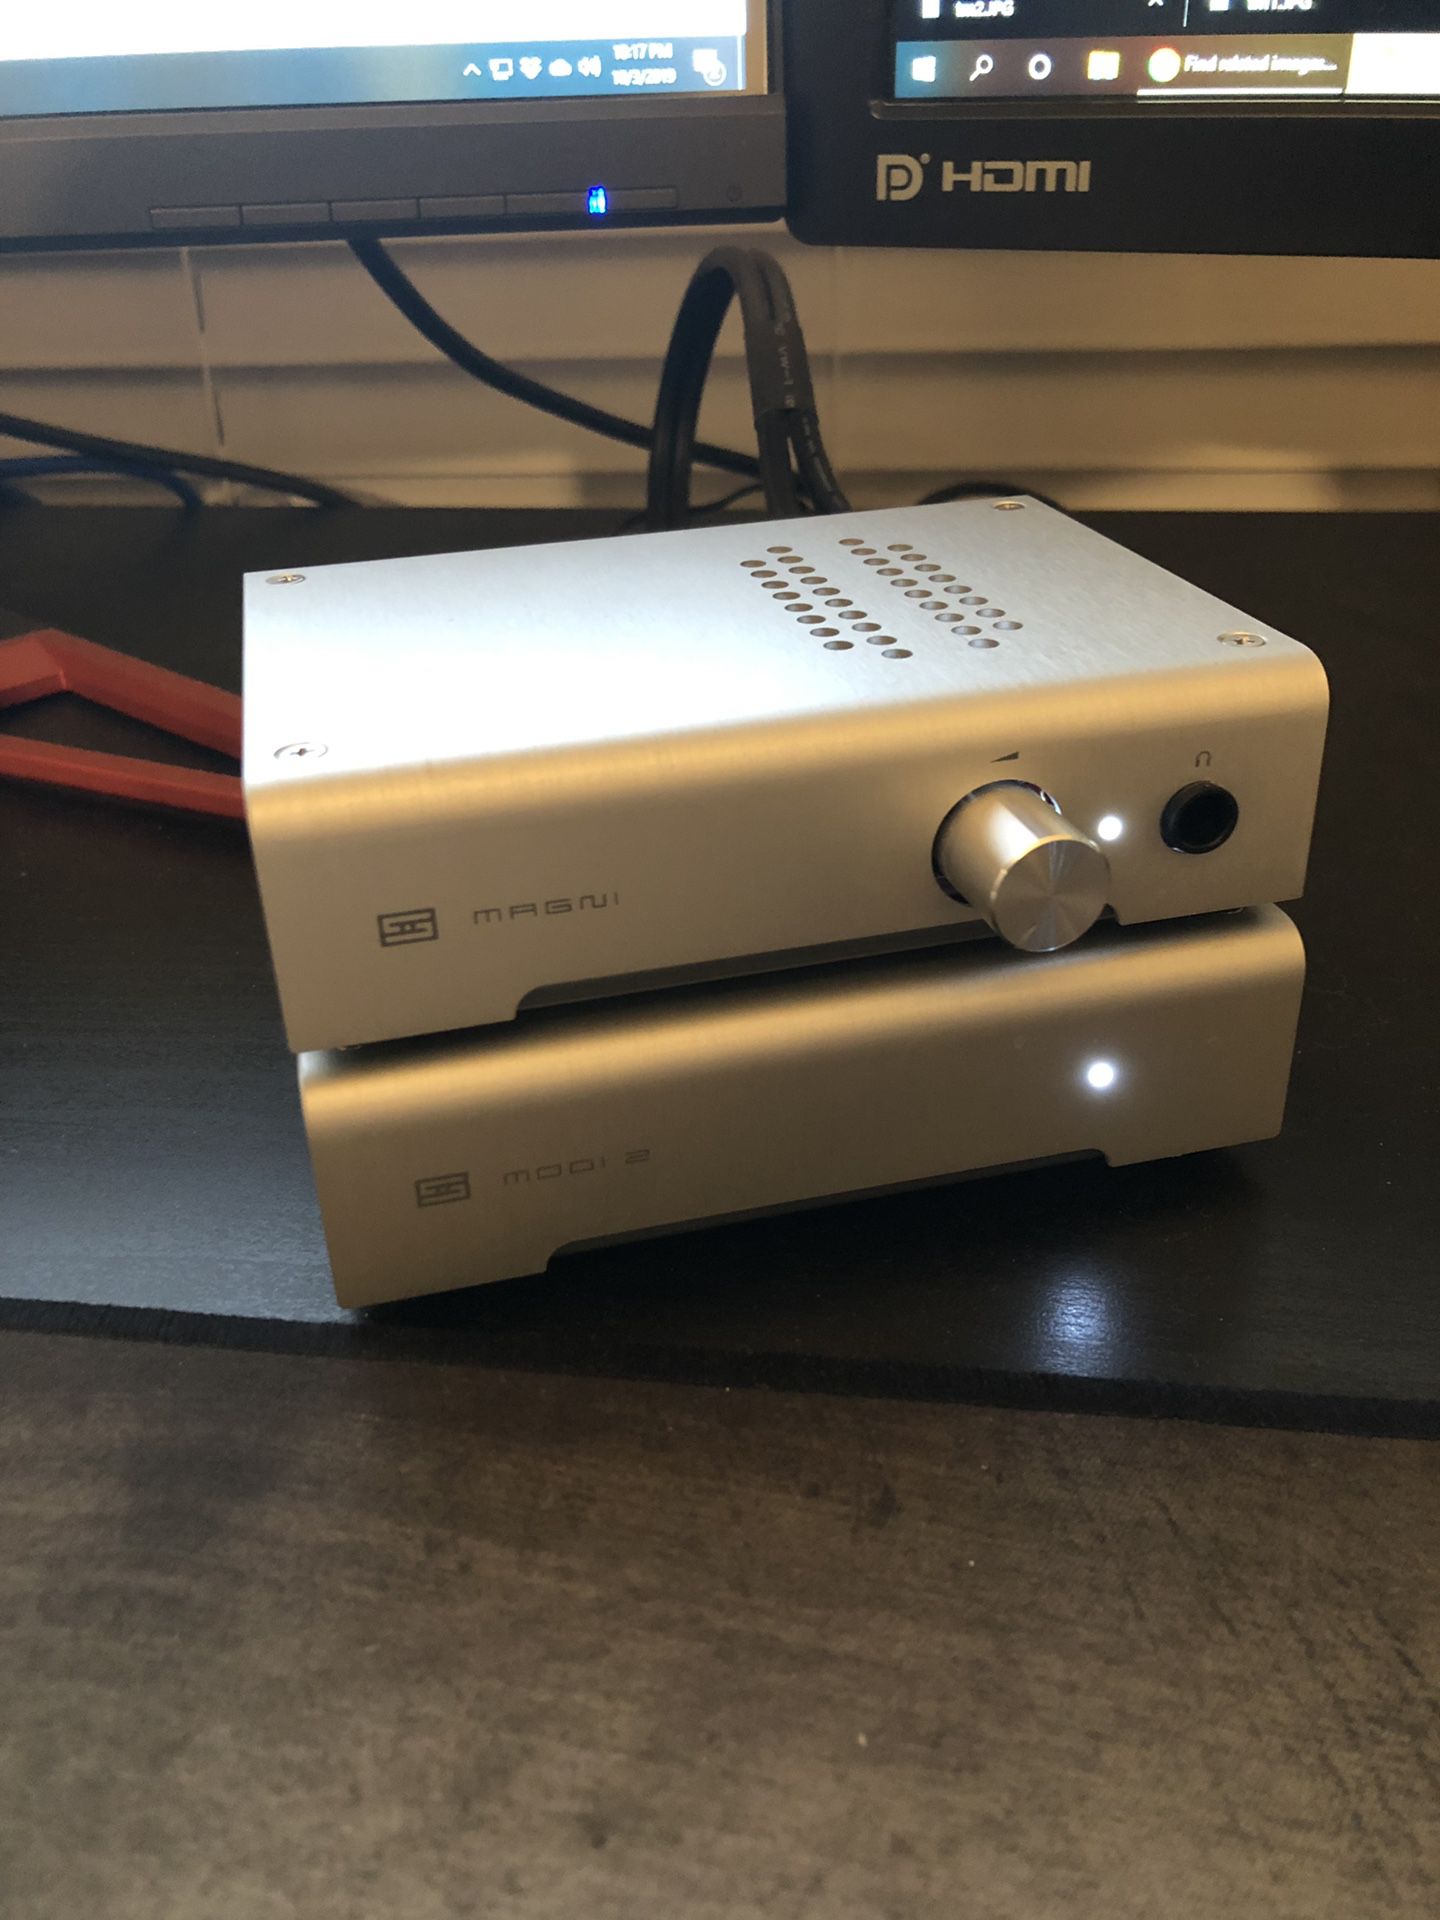 Schiit Stack (Magni and Modi headphone DAC and amplifier)